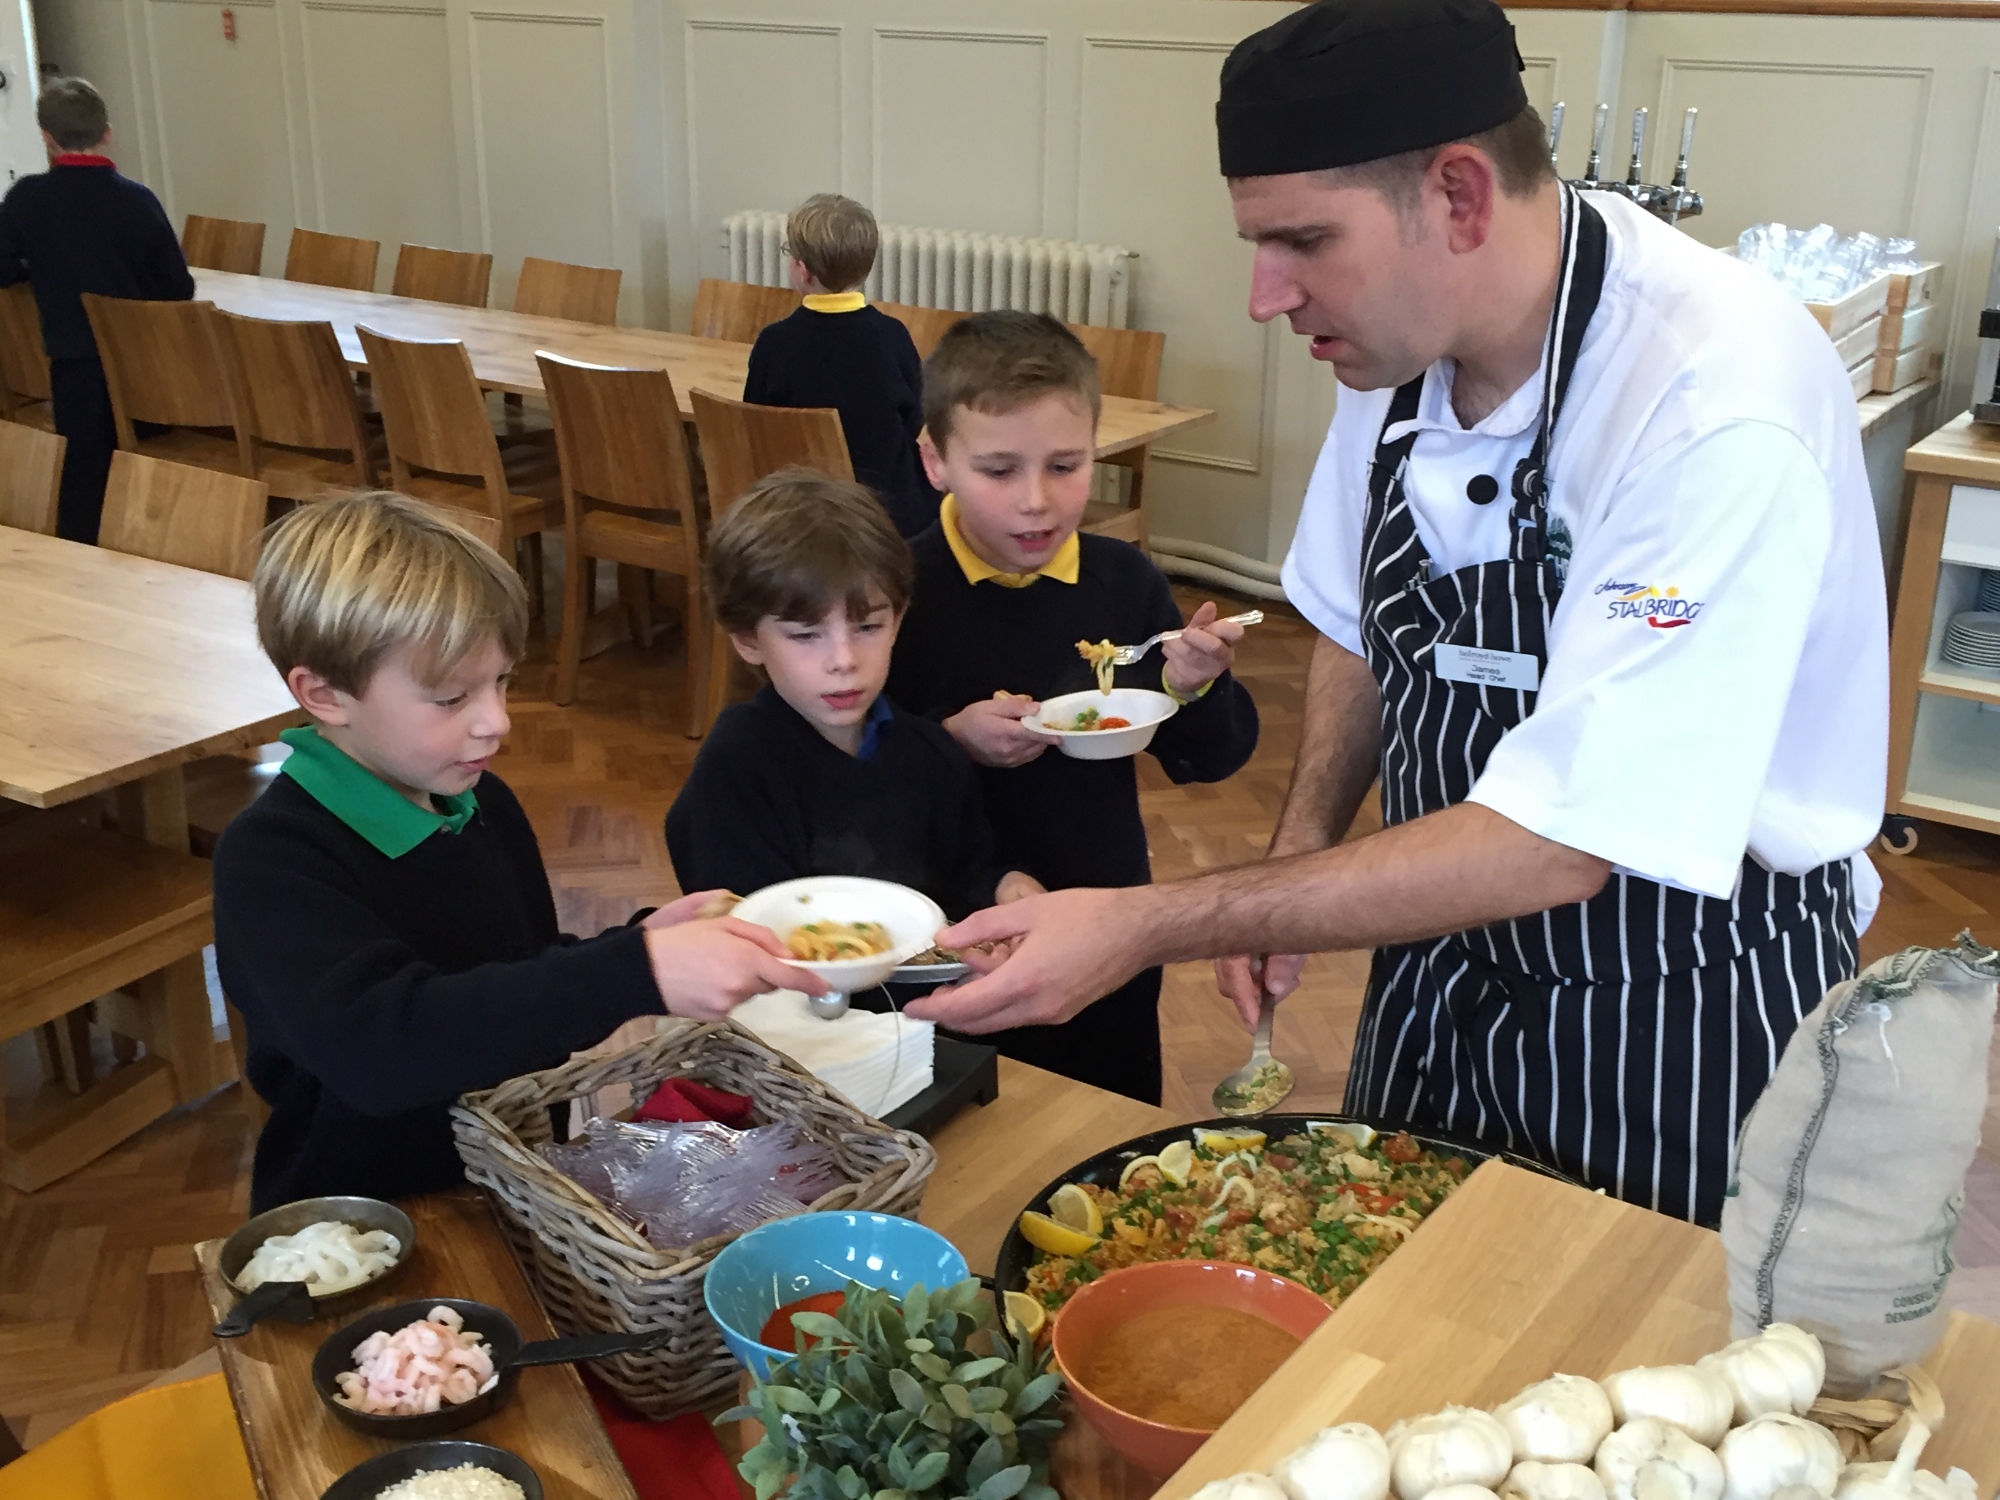 School chef serving food to three boys in the dining room